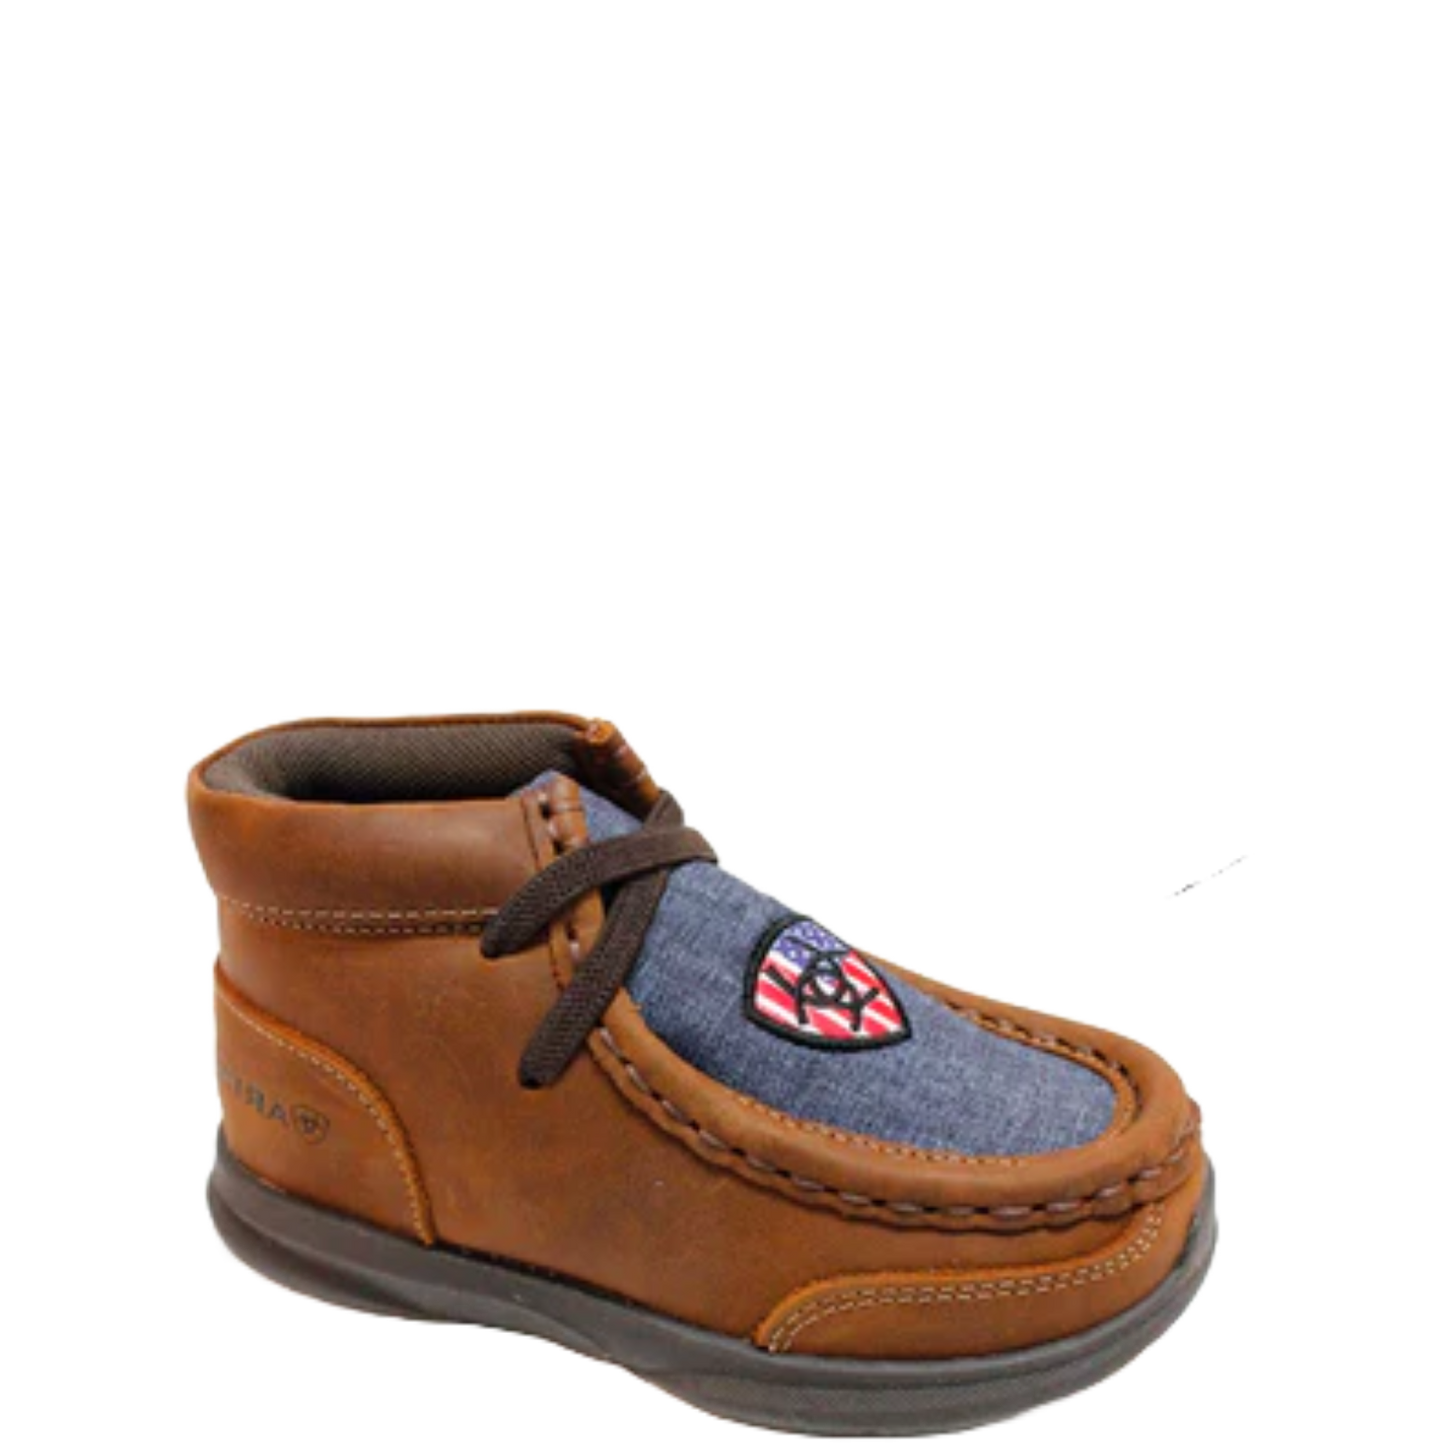 Ariat Toddler Boy's Lil Stomper USA Brown Shoes A443001602